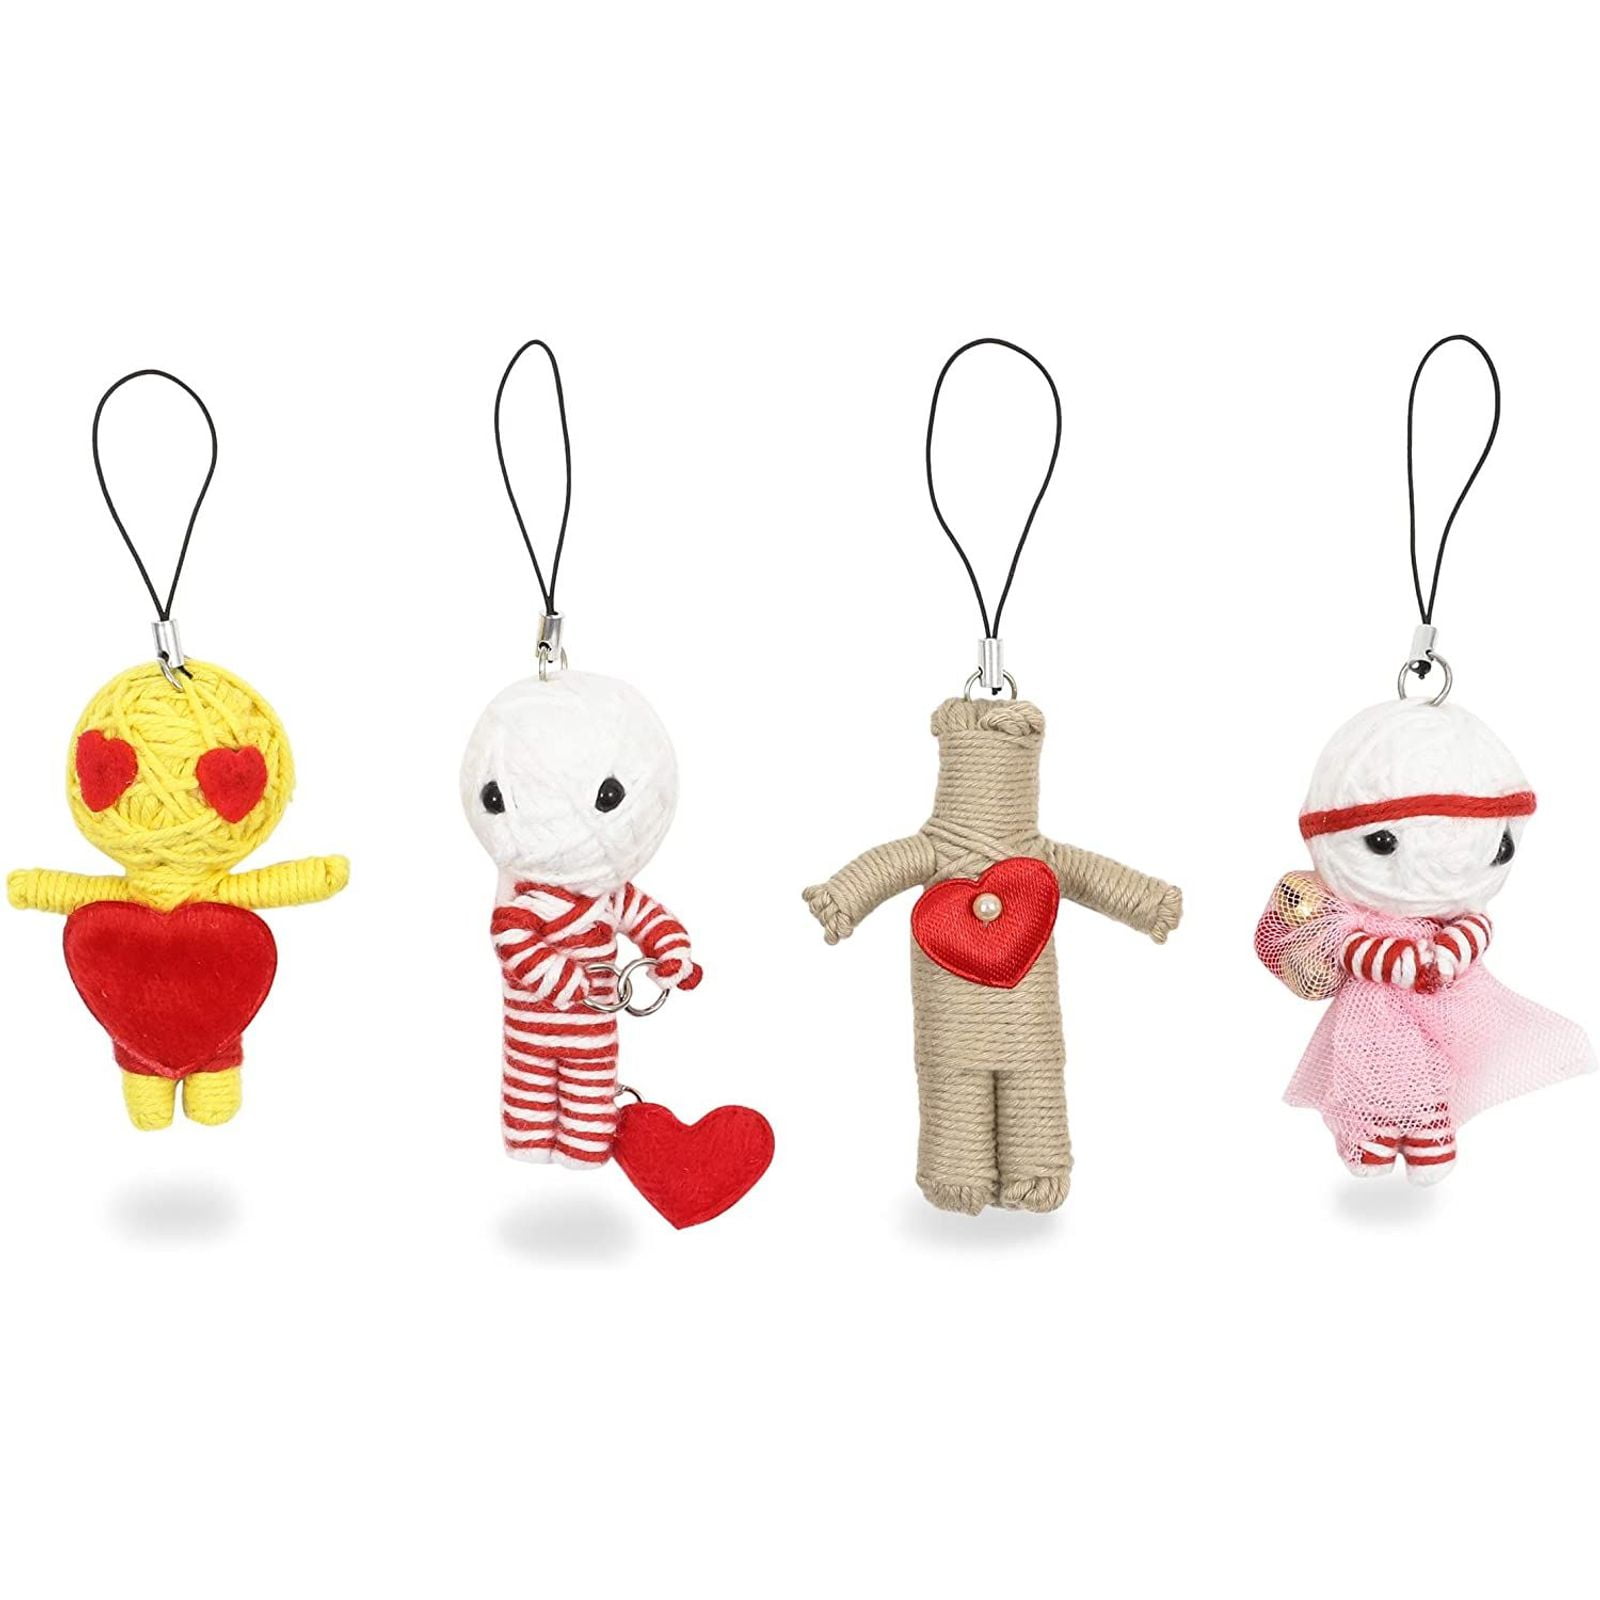 Lovely Mum Novelty Voodoo Doll Keyring/Keychain Gift Collectable New 